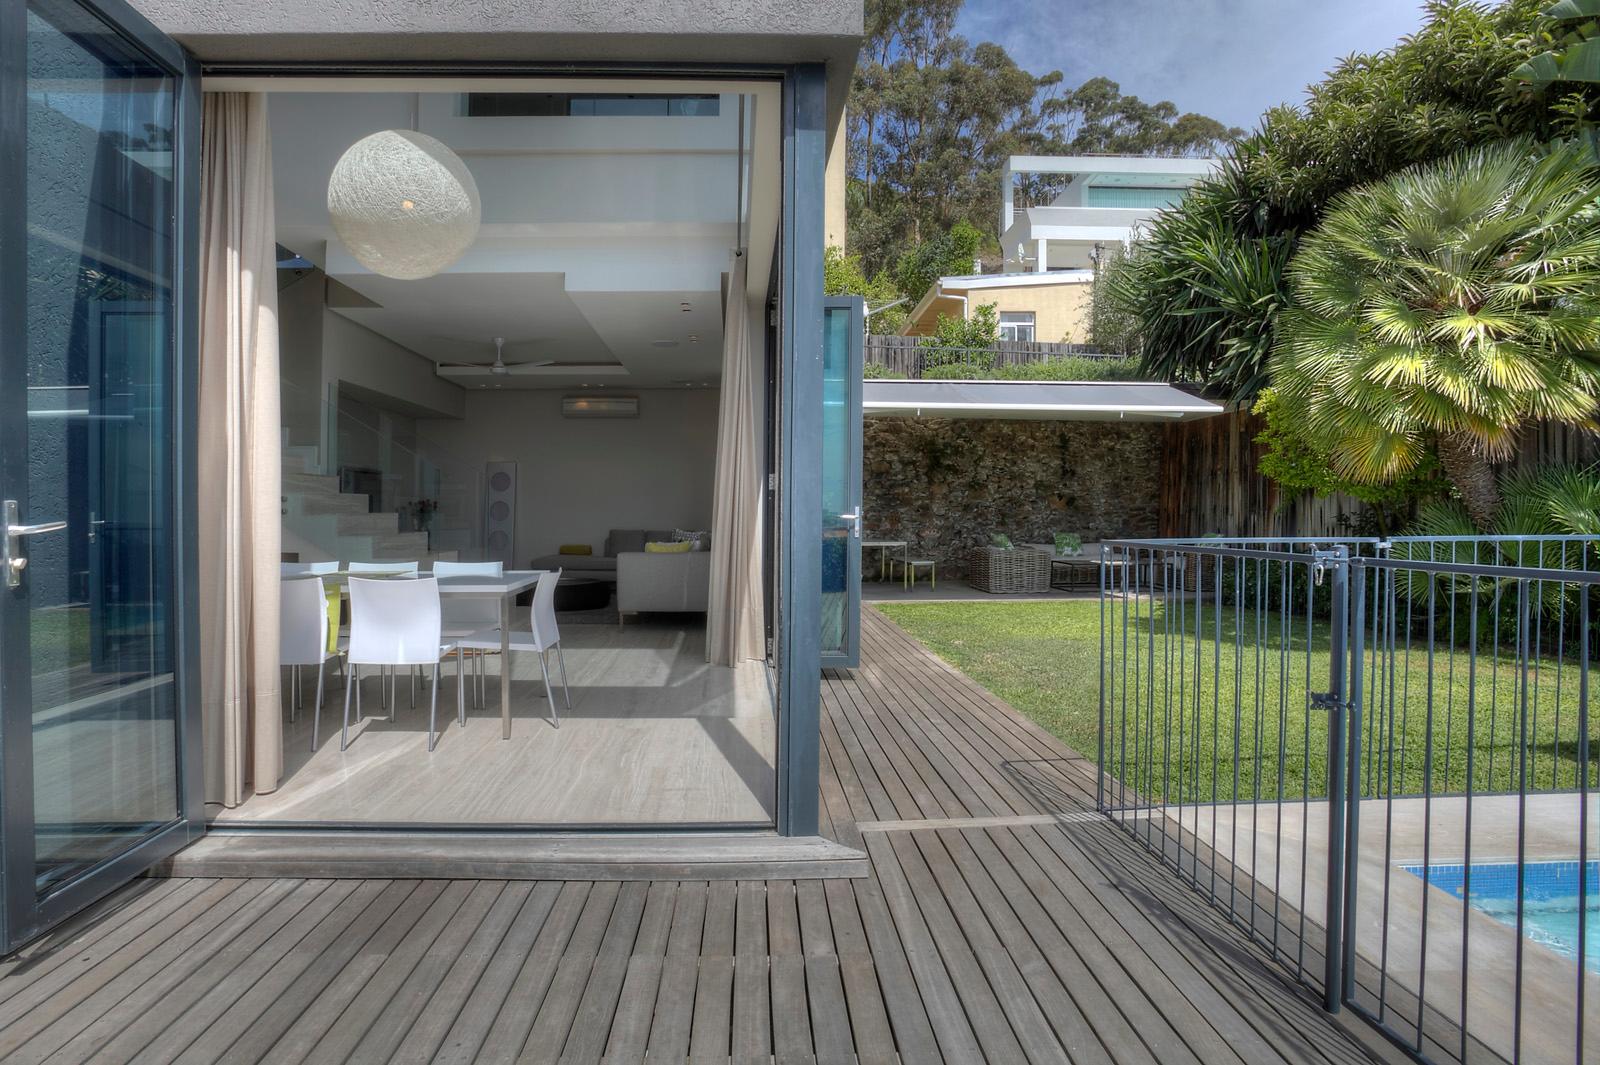 Photo 2 of Bordeaux Villa accommodation in Fresnaye, Cape Town with 4 bedrooms and 3.5 bathrooms